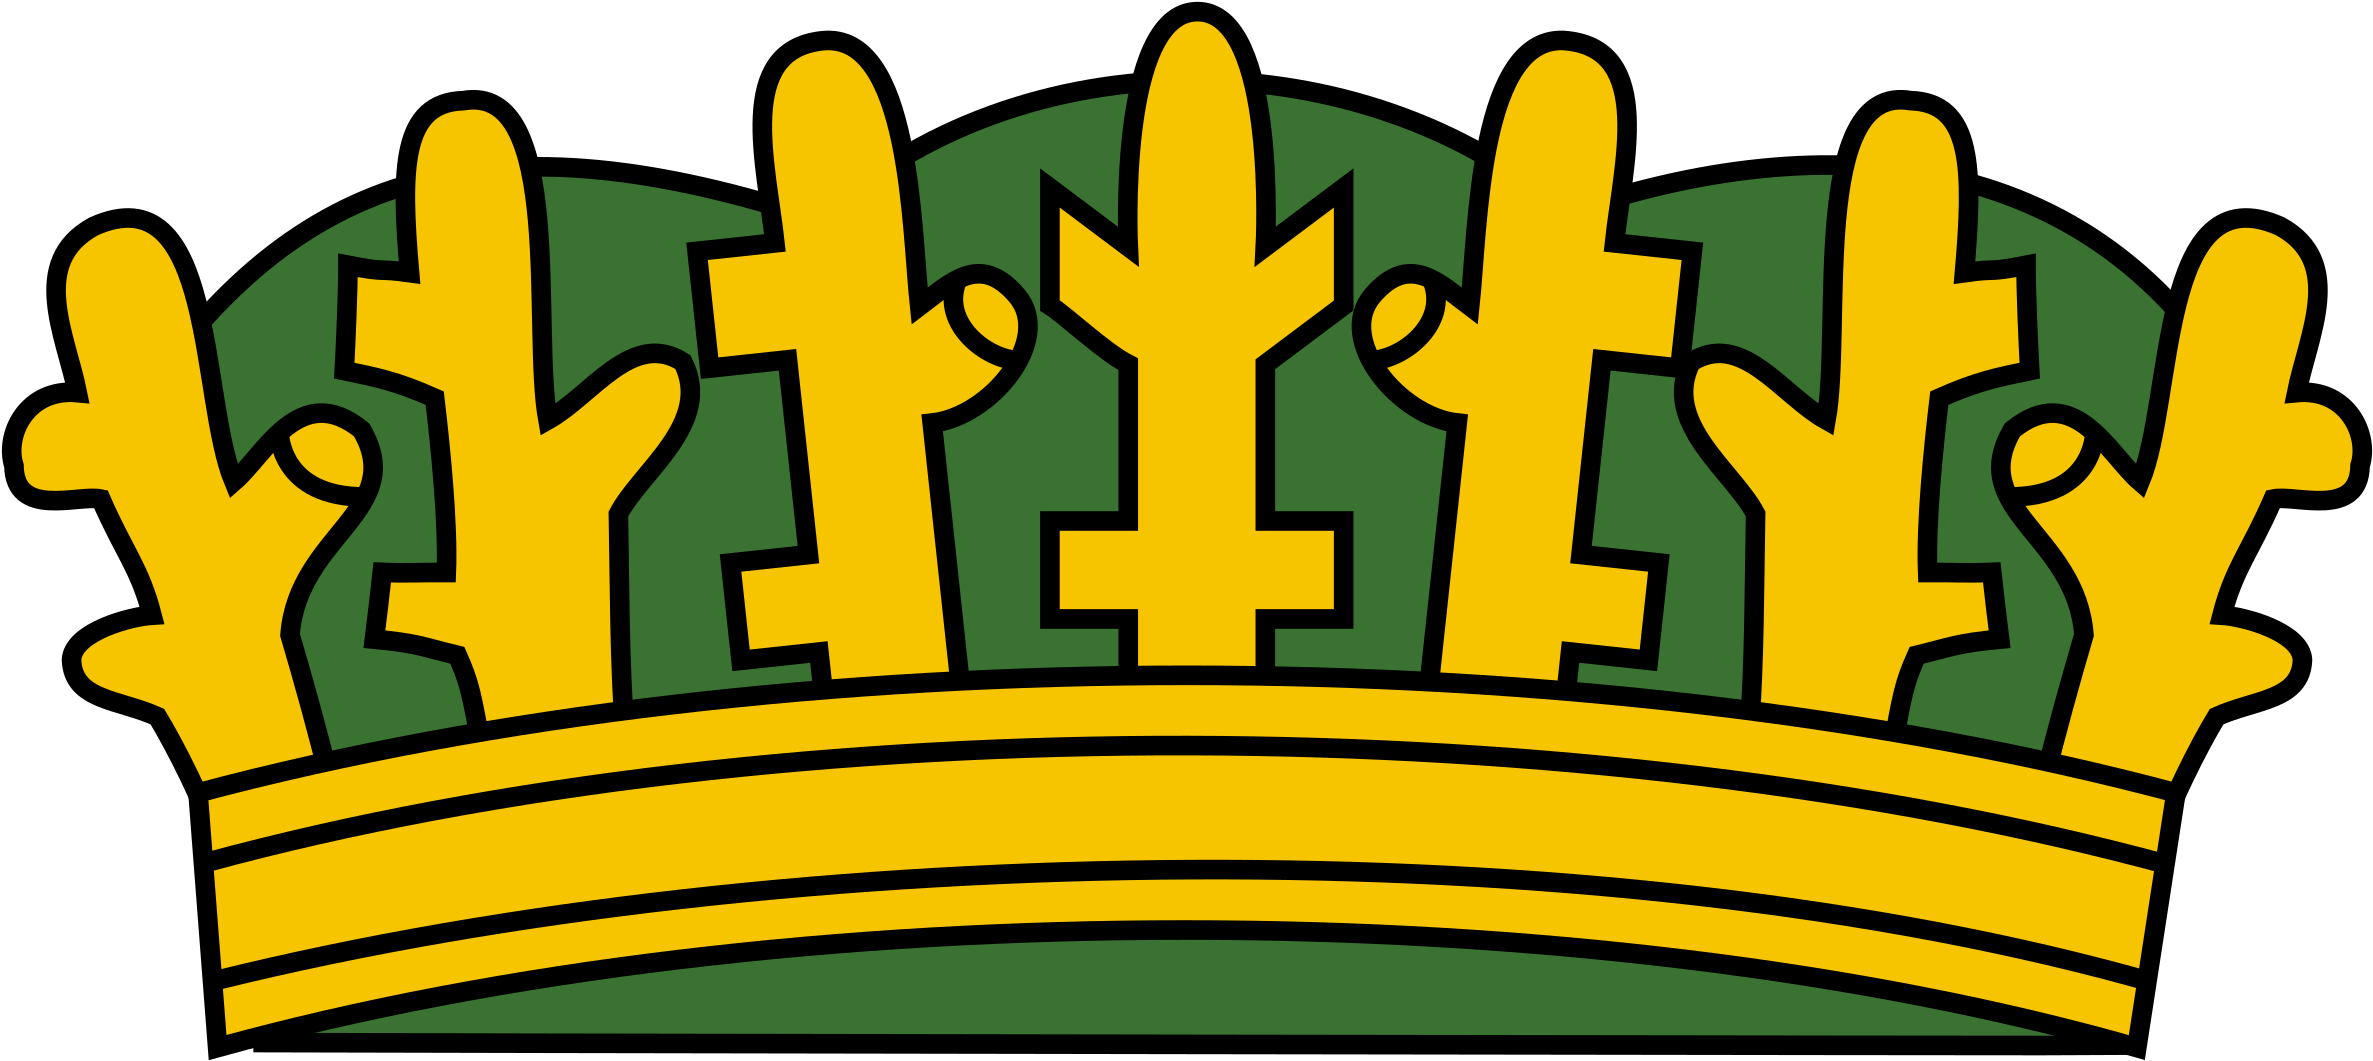 A Yellow And Green Cactus Crown